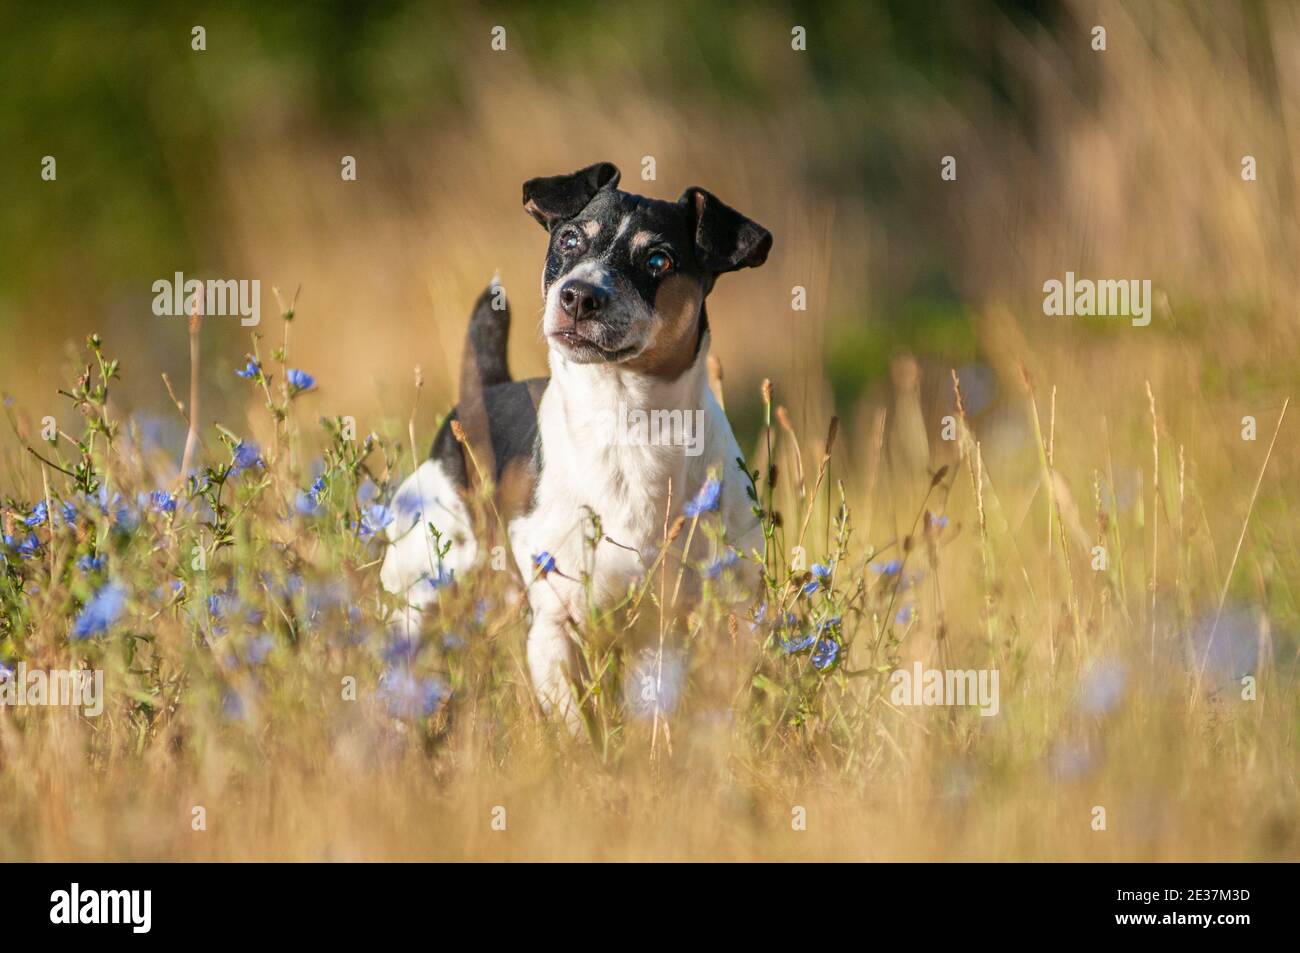 Old tricolor Jack Russell Terrier in a natural environment. The dog is blind and has a serious expression Stock Photo